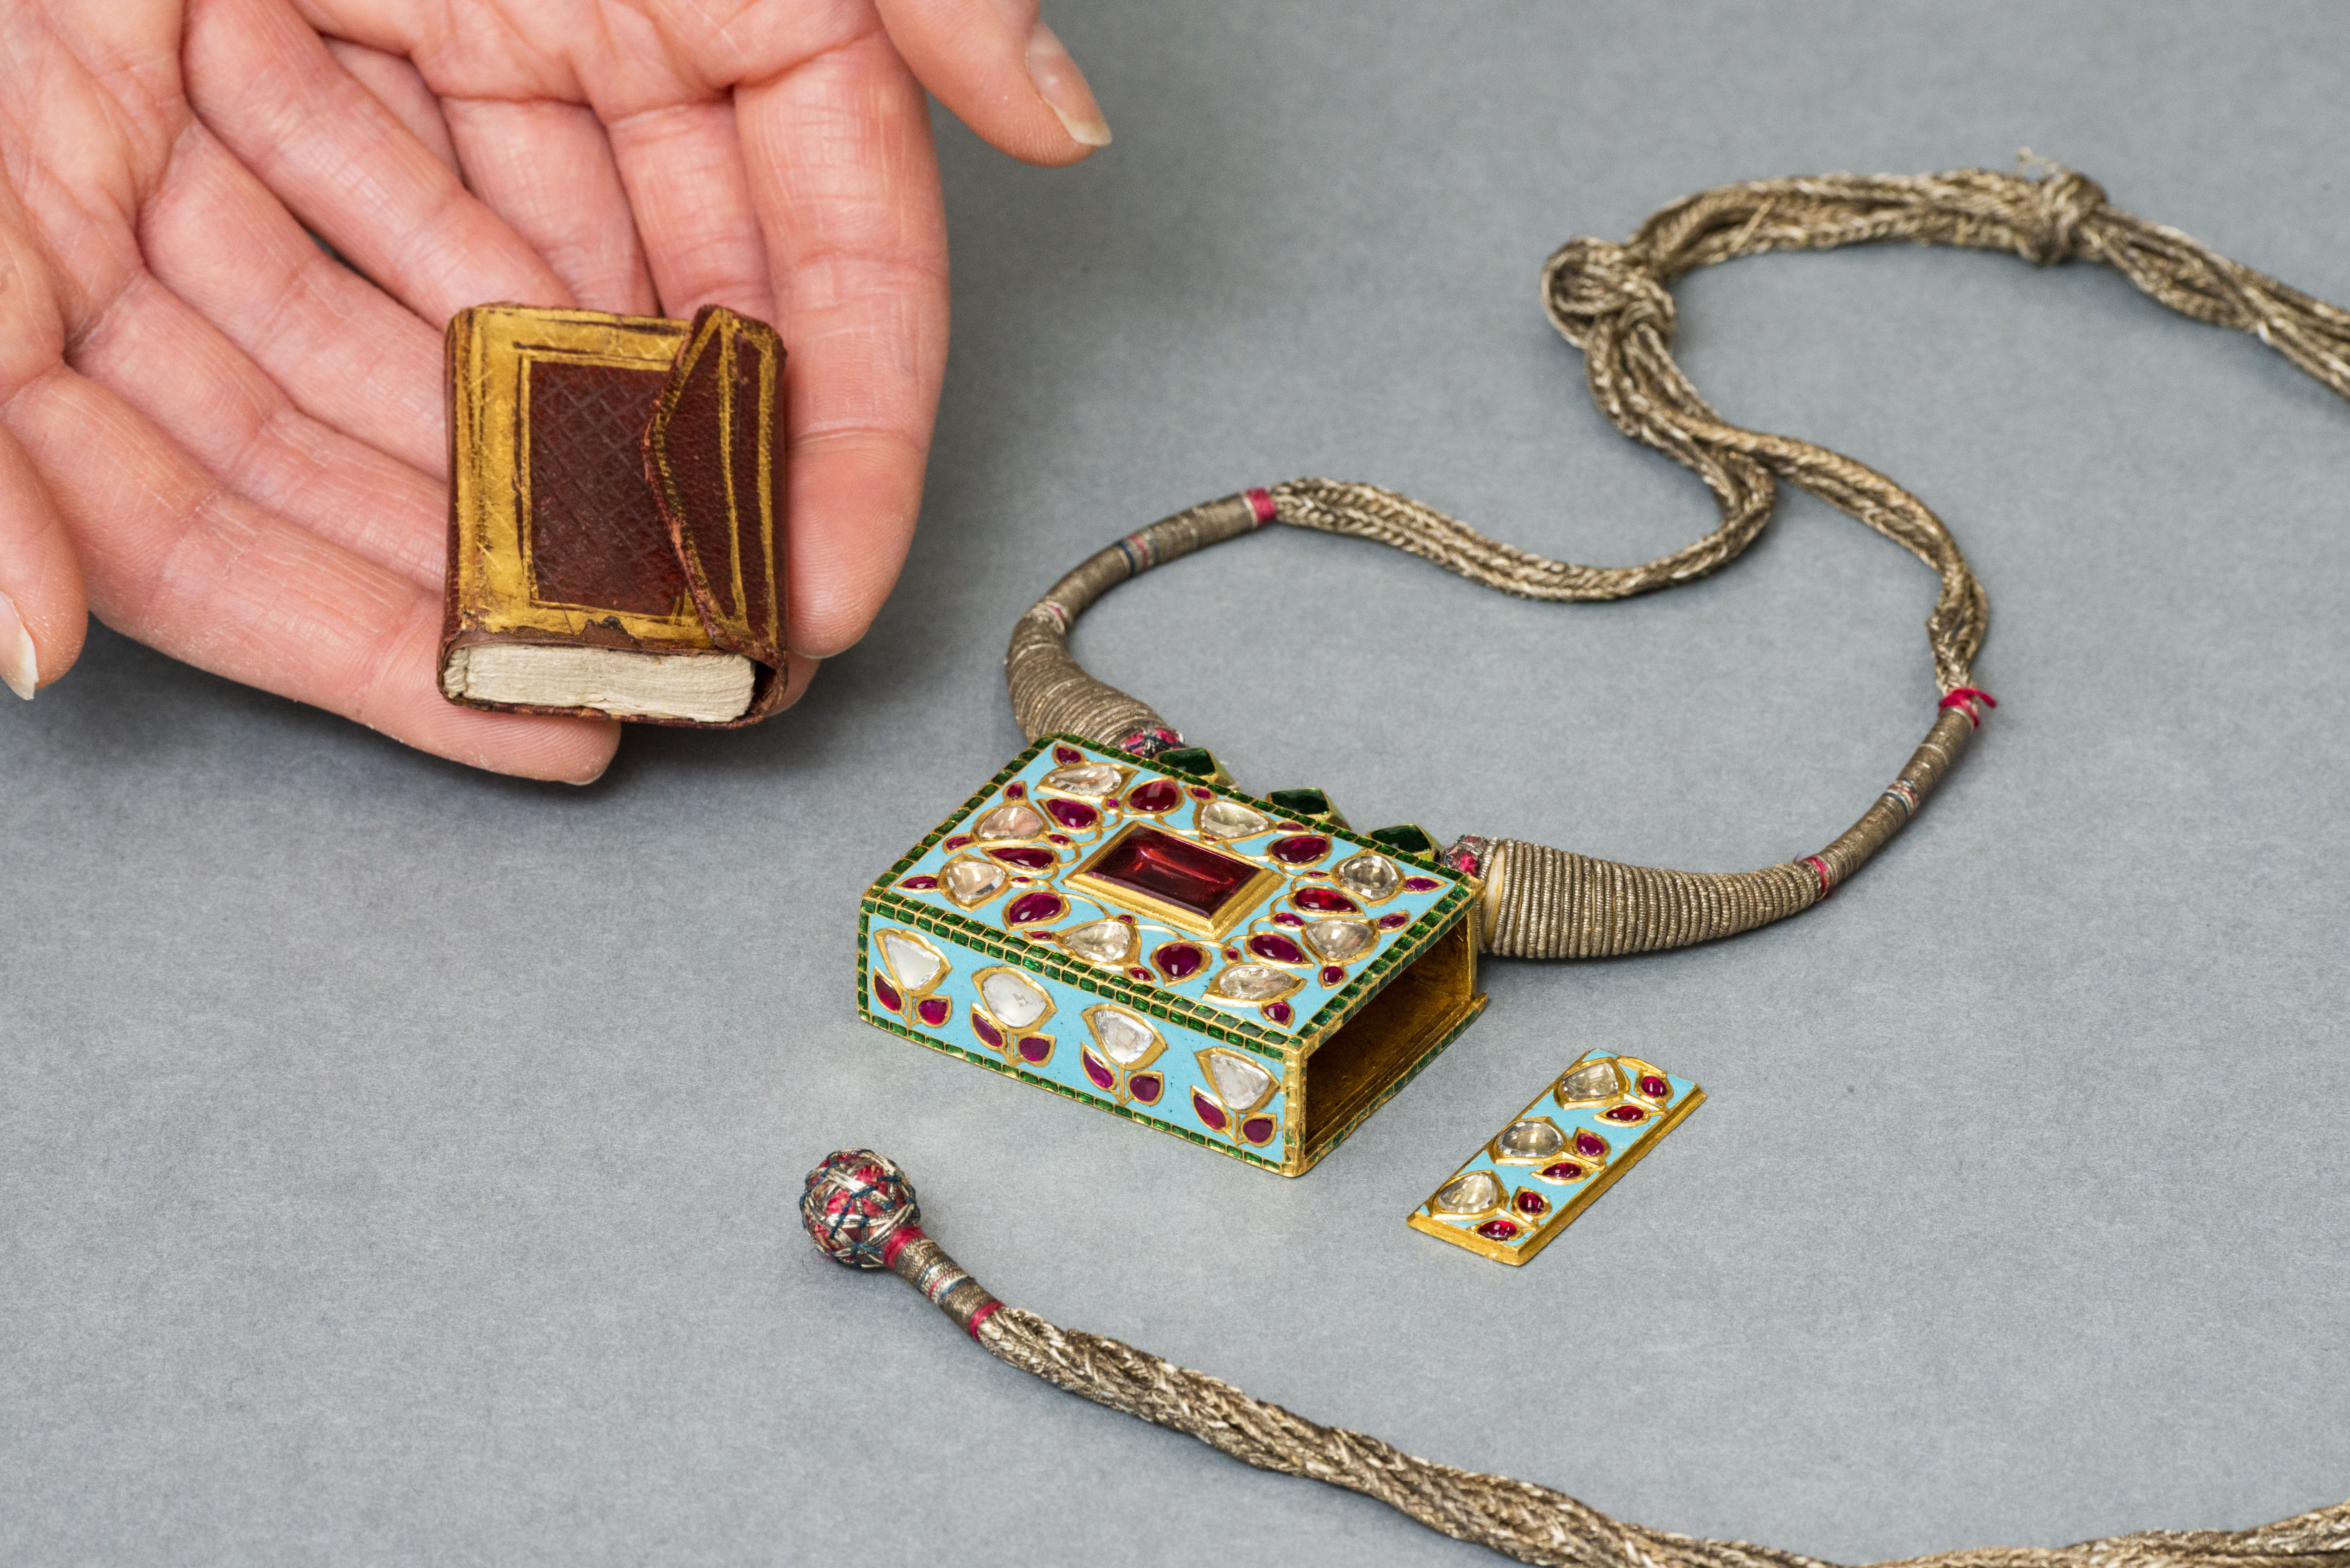 Jewelled necklace with amulet Quran